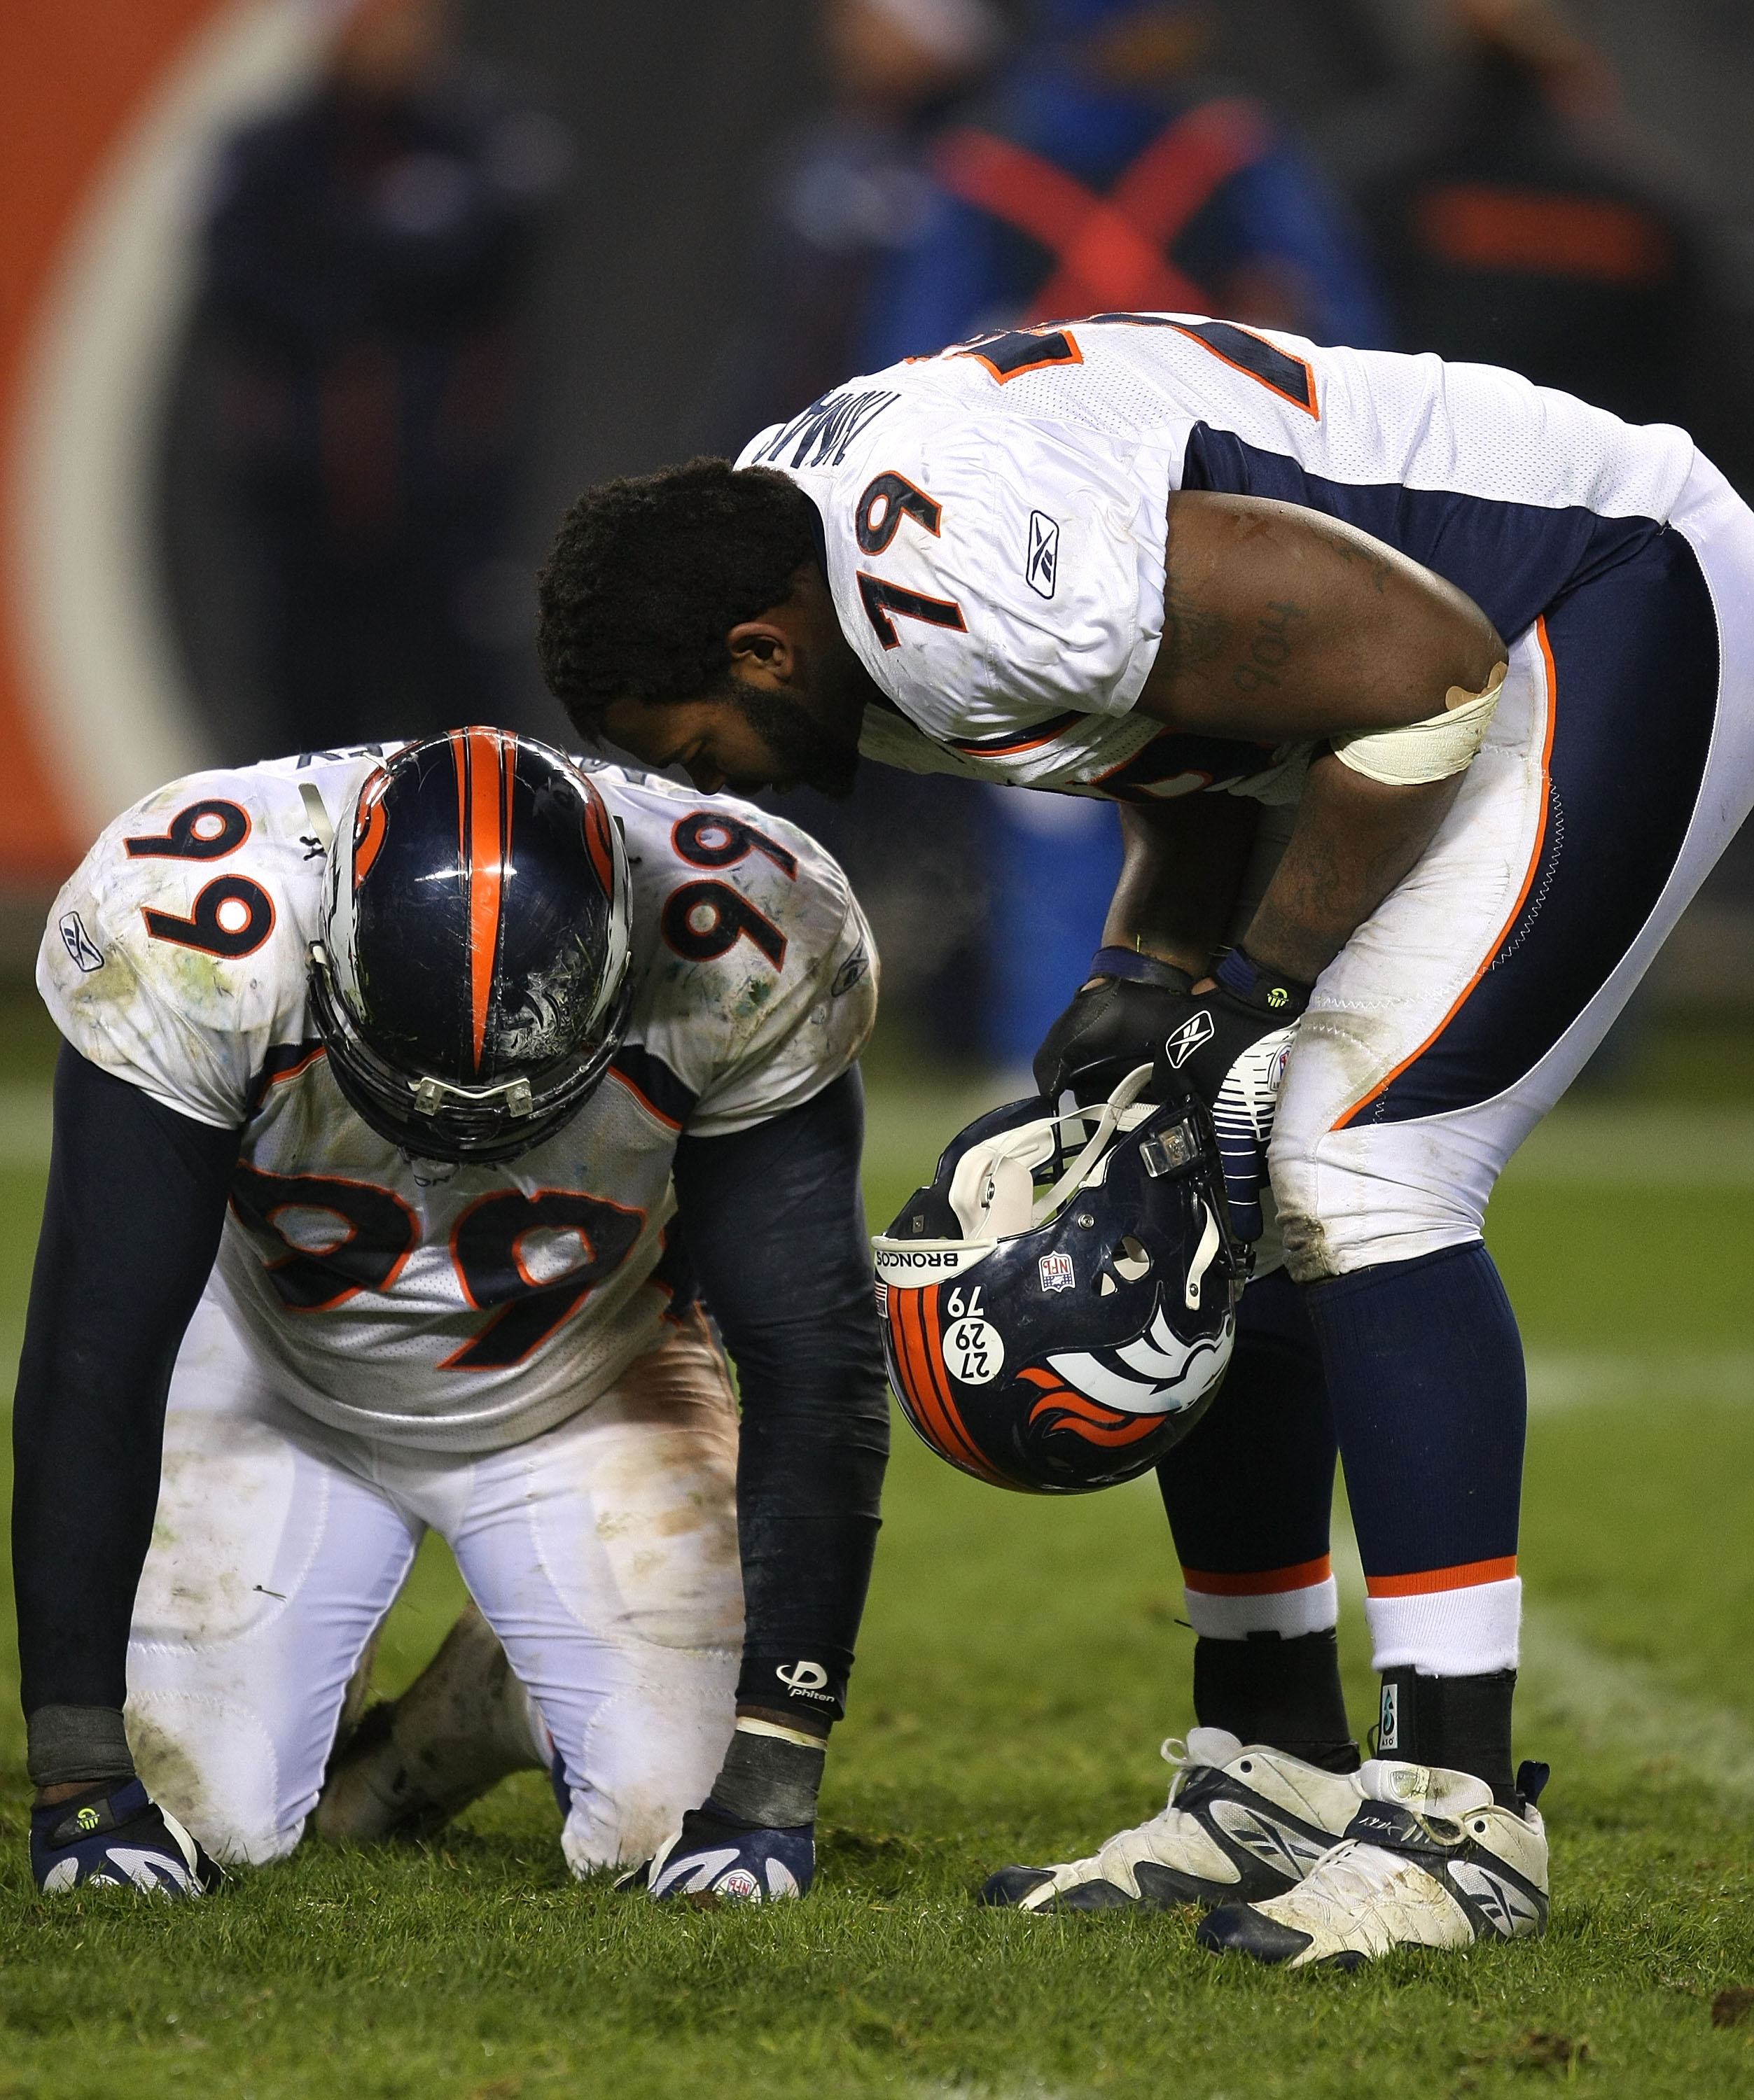 CHICAGO - NOVEMBER 25: Alvin McKinley #99 and Marcus Thomas #79 of the Denver Broncos react after losing to the Chicago Bears on a field goal in overtime on November 25, 2007 at Soldier Field in Chicago, Illinois. (Photo by Jonathan Daniel/Getty Images)